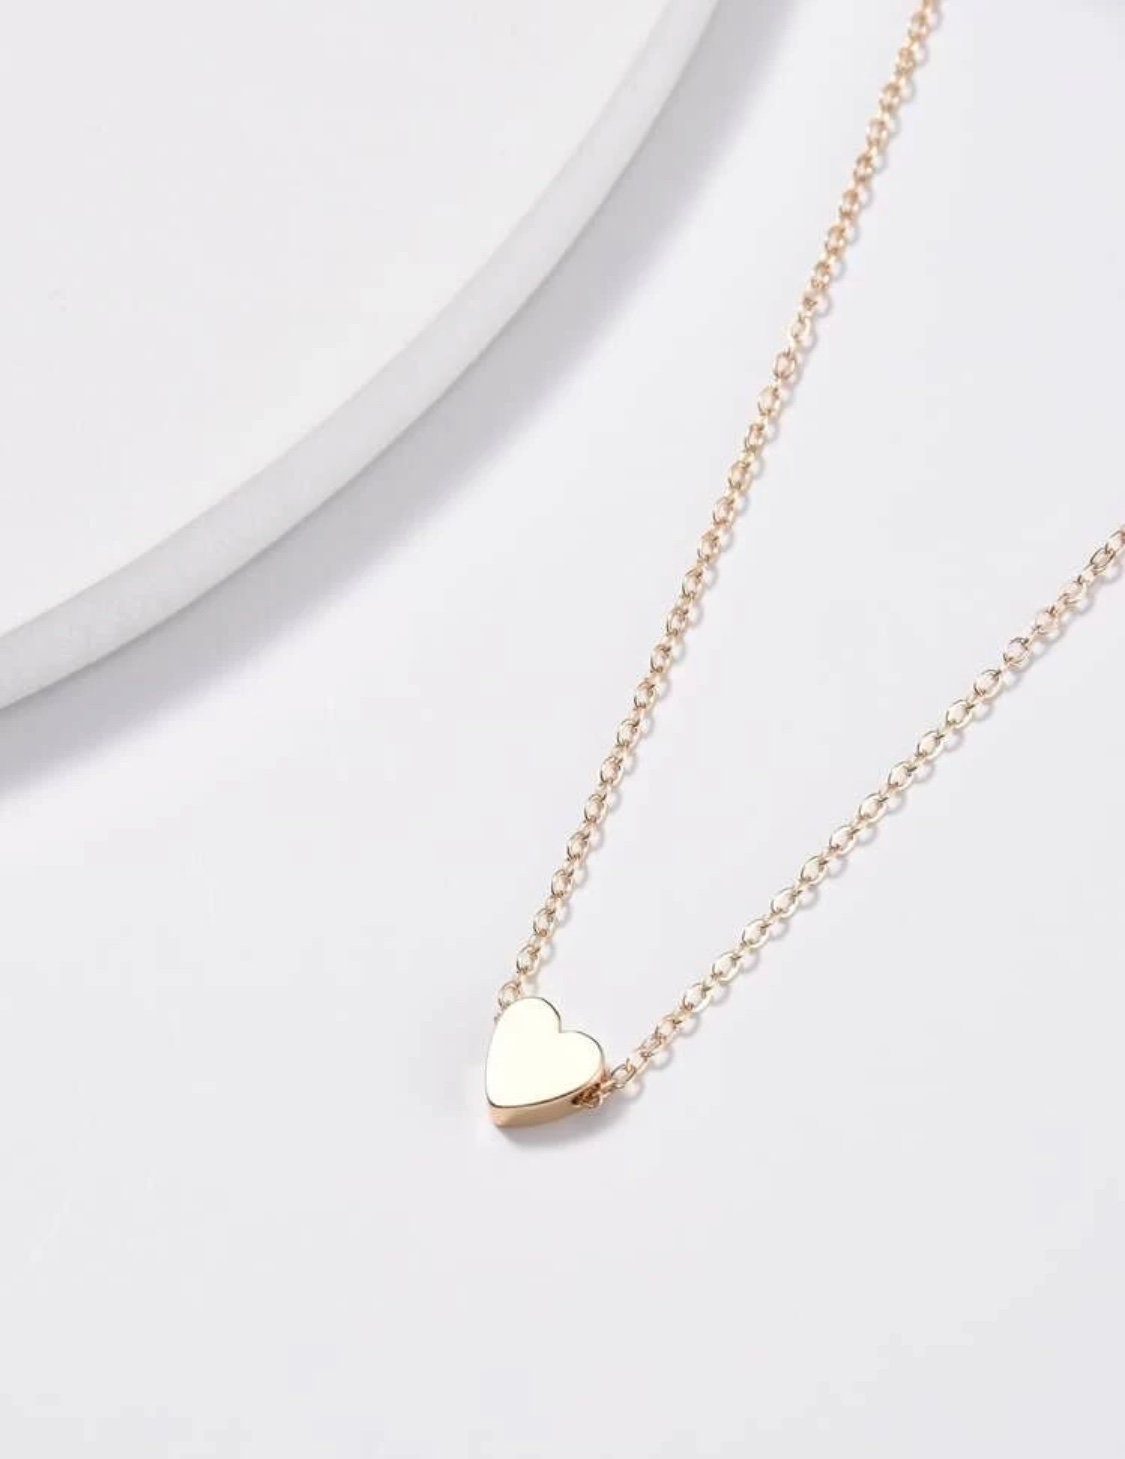 Gold Heart Charm Necklace, Dainty Heart Charm Necklace, Anniversary Gift For Her, Girlfriend Gift Idea, Her Valentines Day Gift, Heart Gift